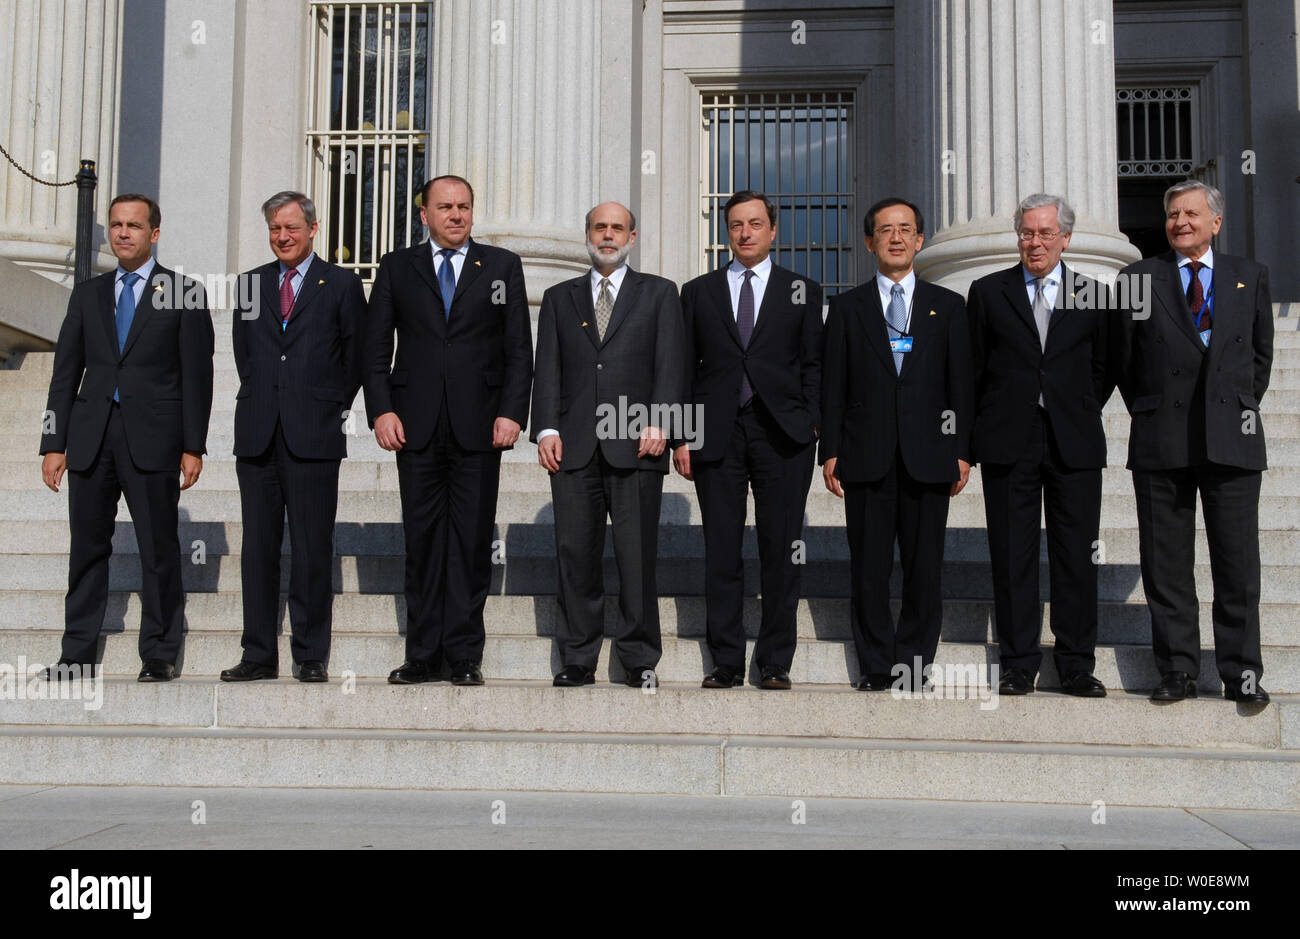 G-7 Summit Central Bank Governors stand for a photo outside the Treasury Department during the G-7 Summit in Washington on April 11, 2008. From left, Mark J. Careny, Canada, Christian Noyer, France, Axel A. Weber, Germany, Ben Bernanke, United States, Mario Draghi, Italy, Masaaki Shirakawa, Japan, Mervyn King, United Kingdom, and Jean-Claude Trichet, European Central Bank. (UPI Photo/Alexis C. Glenn) Stock Photo